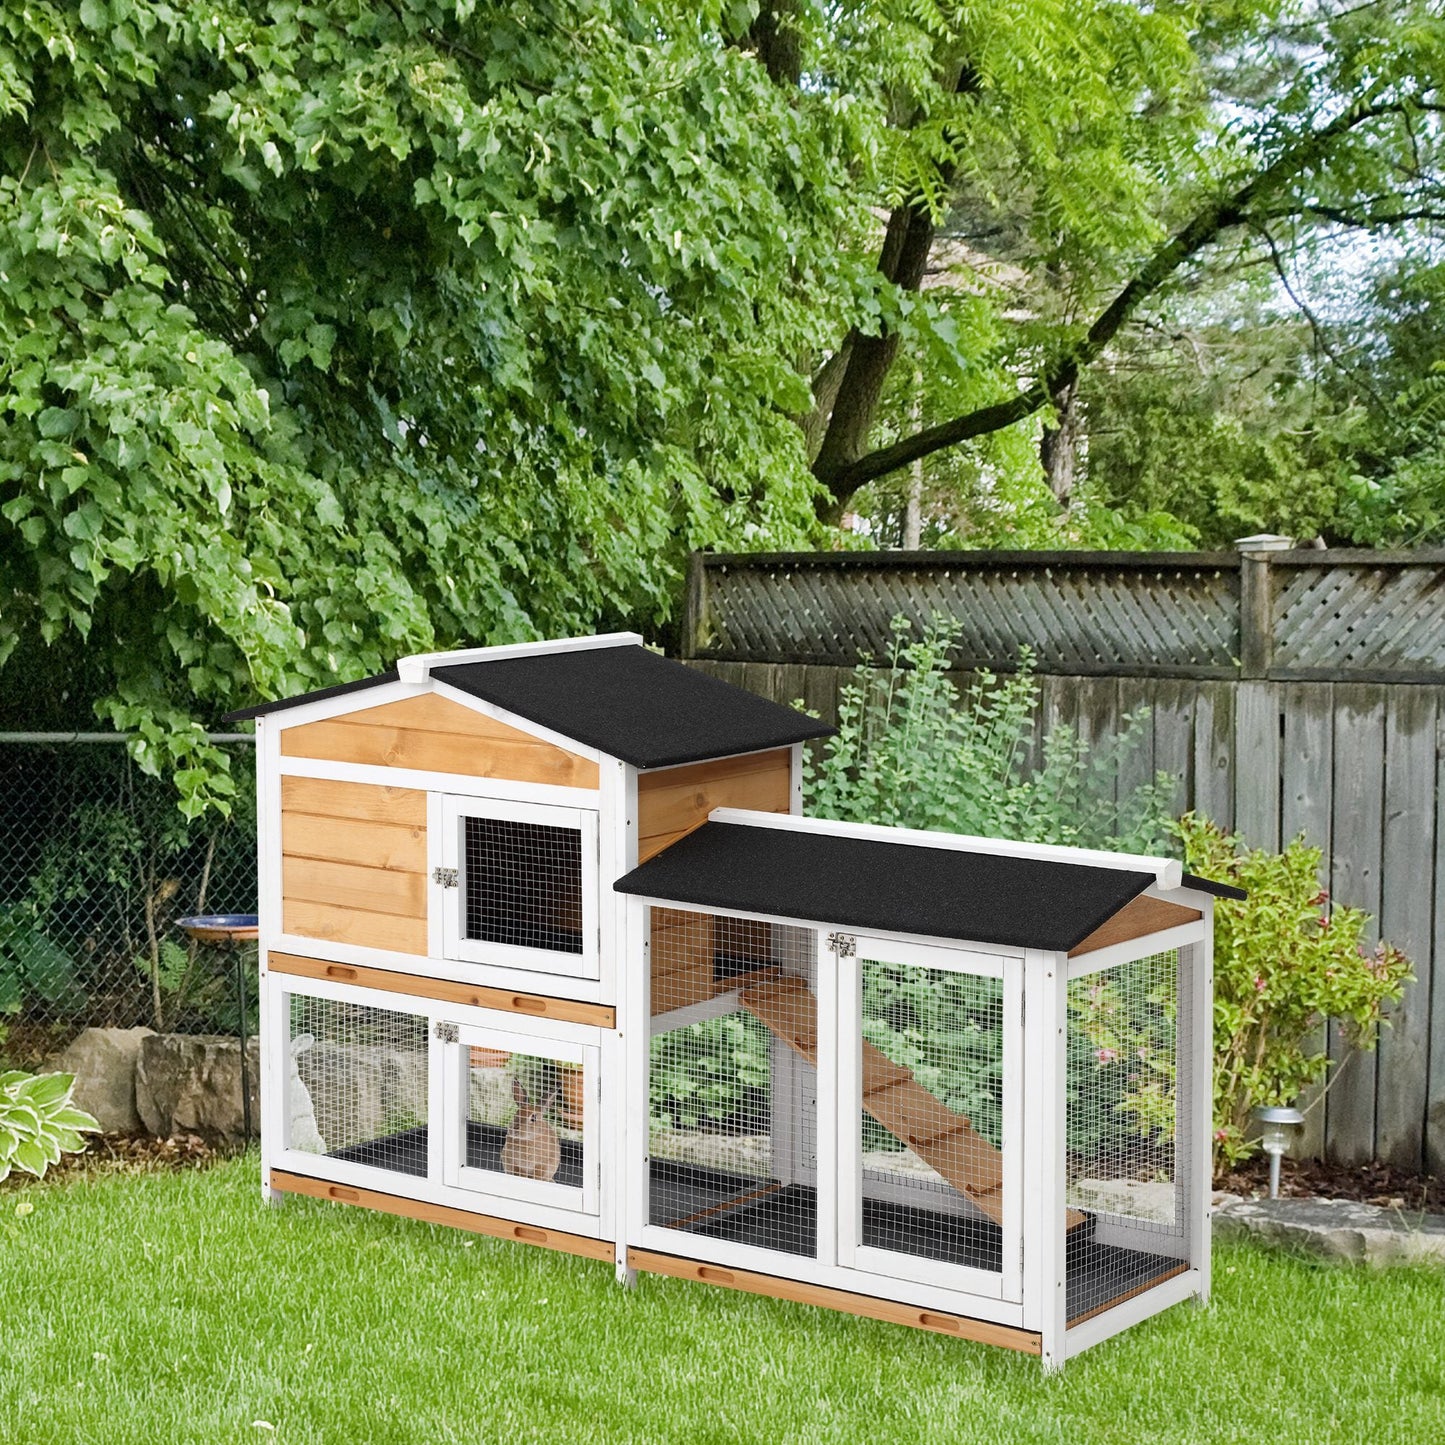 PawHut Rabbit Hutch Guinea Pig Hutch Wooden House with Run, 2 Tier Pet Cage Outdoor 157.4 x 53 x 93.5cm, Yellow